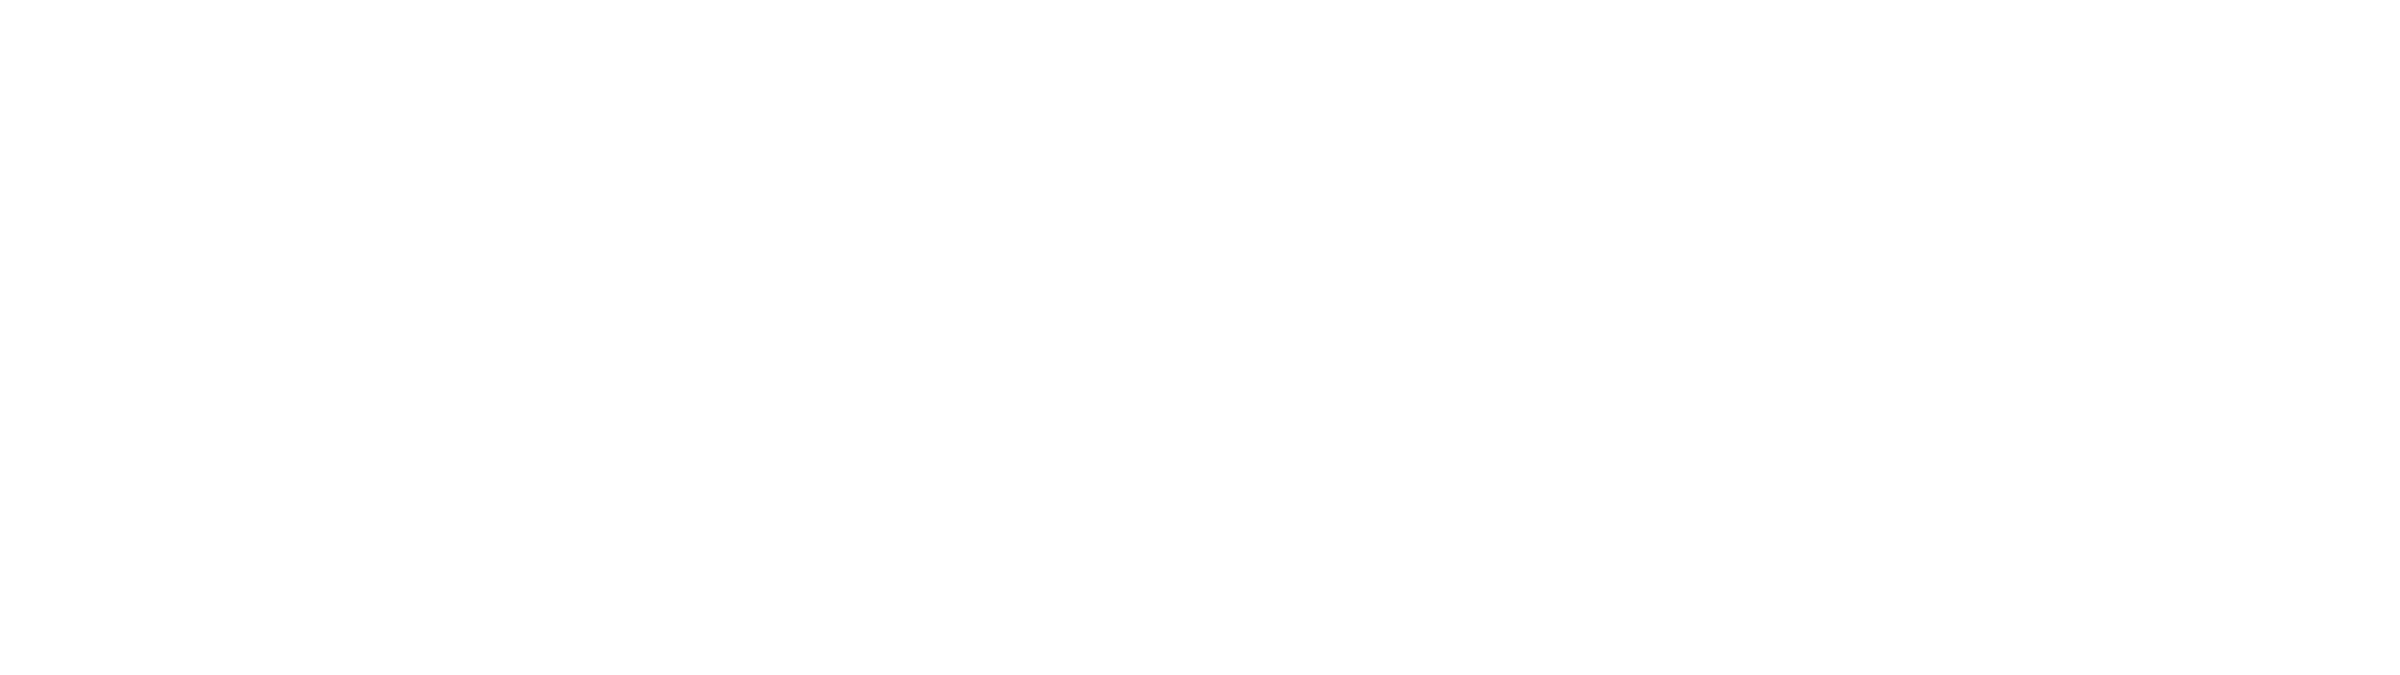 Forbes Logo PNG - 175668